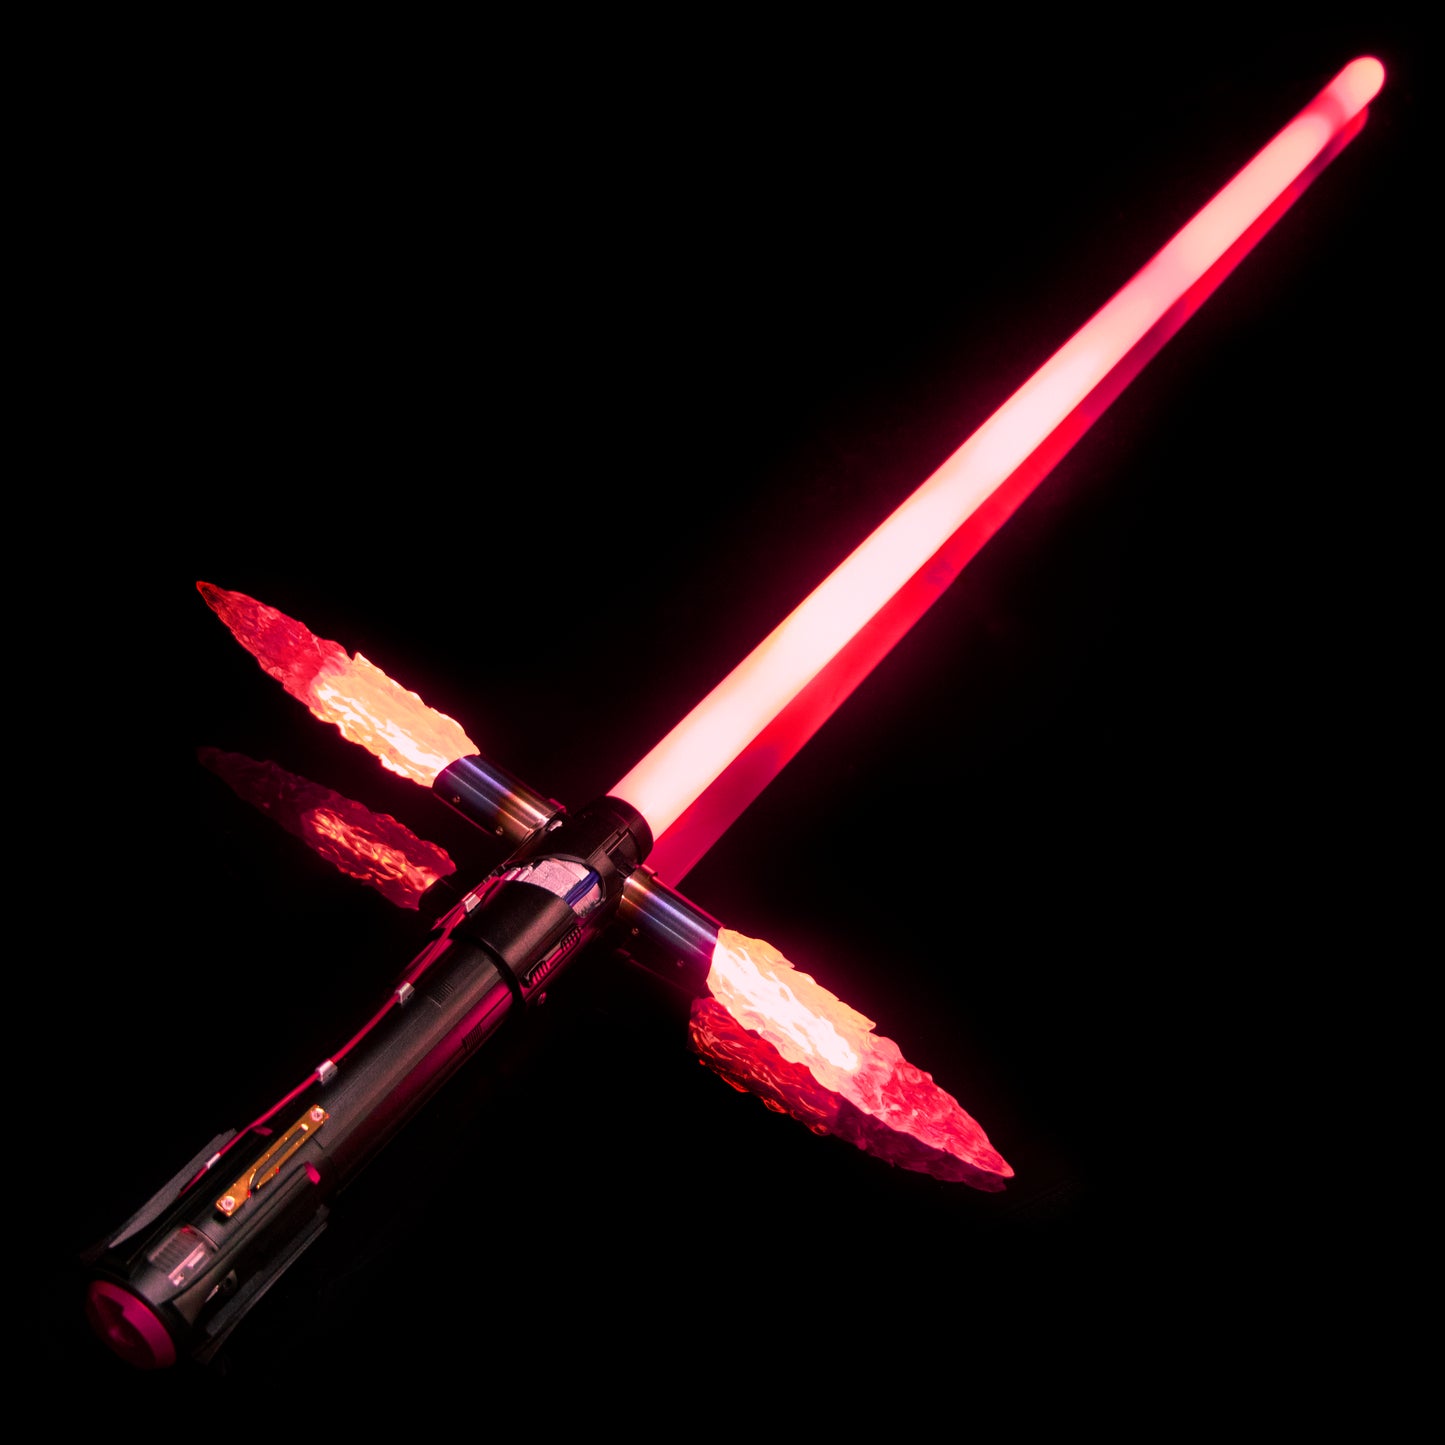 The Blade of Chaotic Redemption: Kylo Ren’s Lightsaber